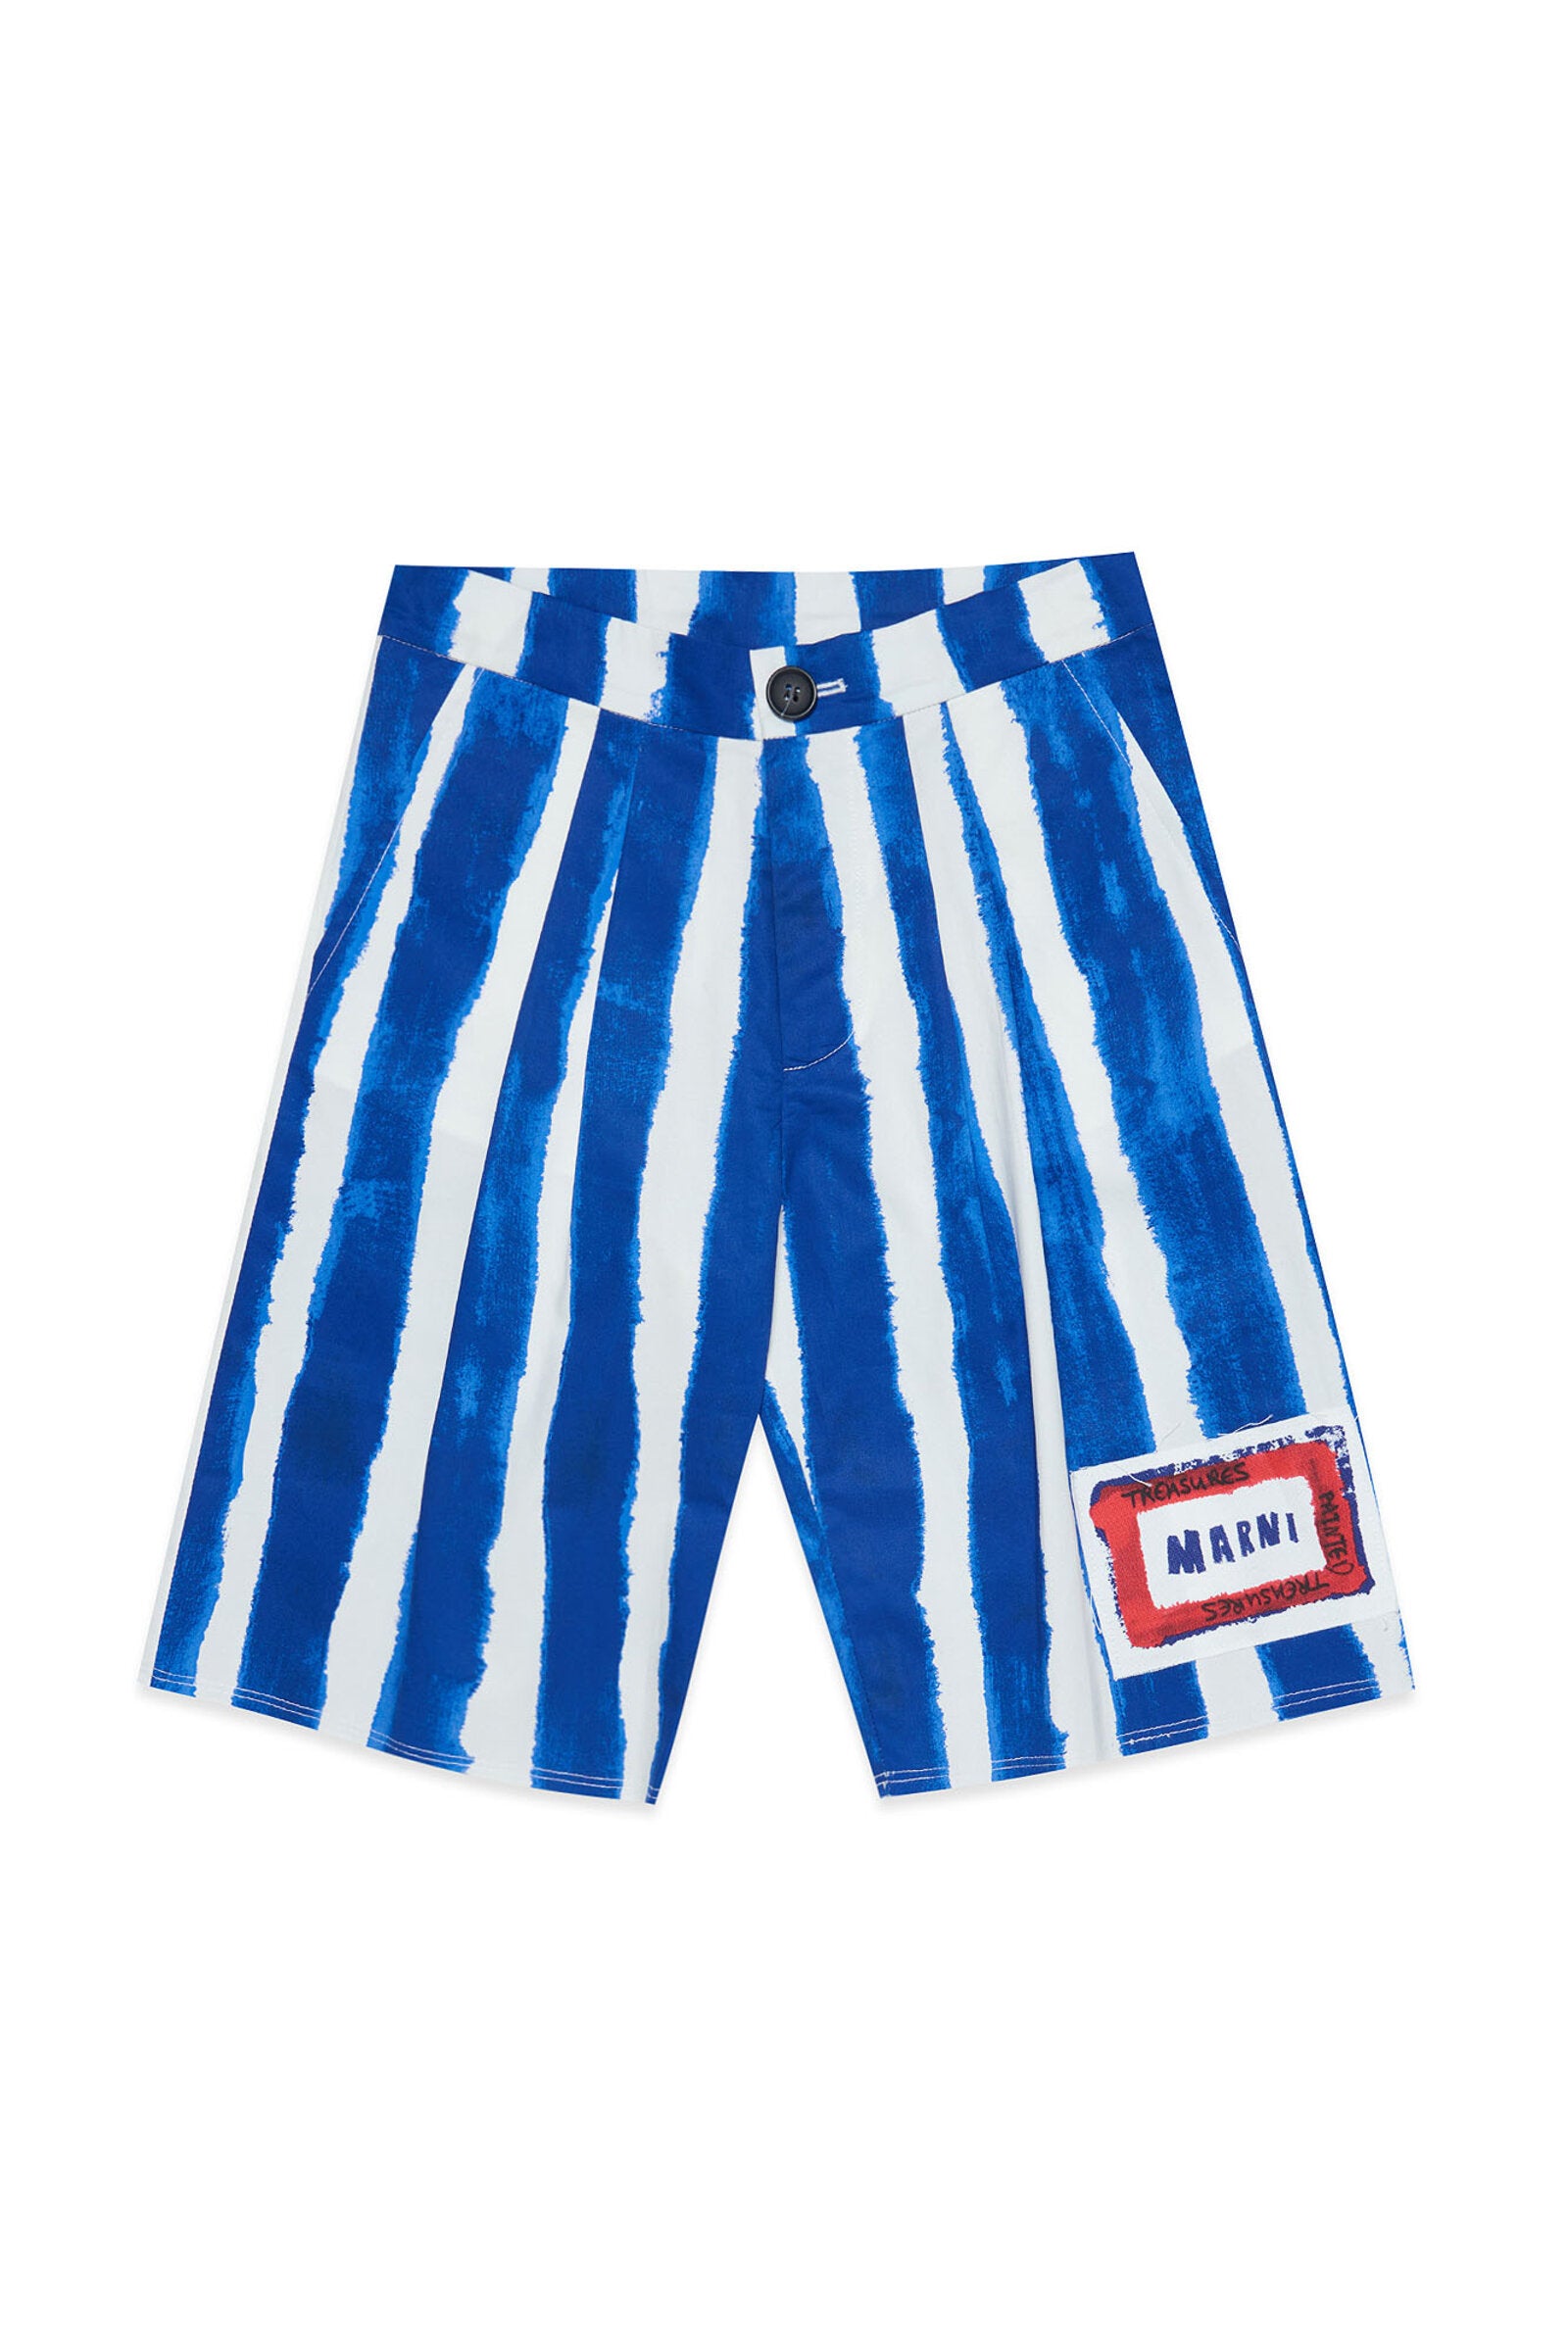 Blue gabardine shorts with allover striped pattern